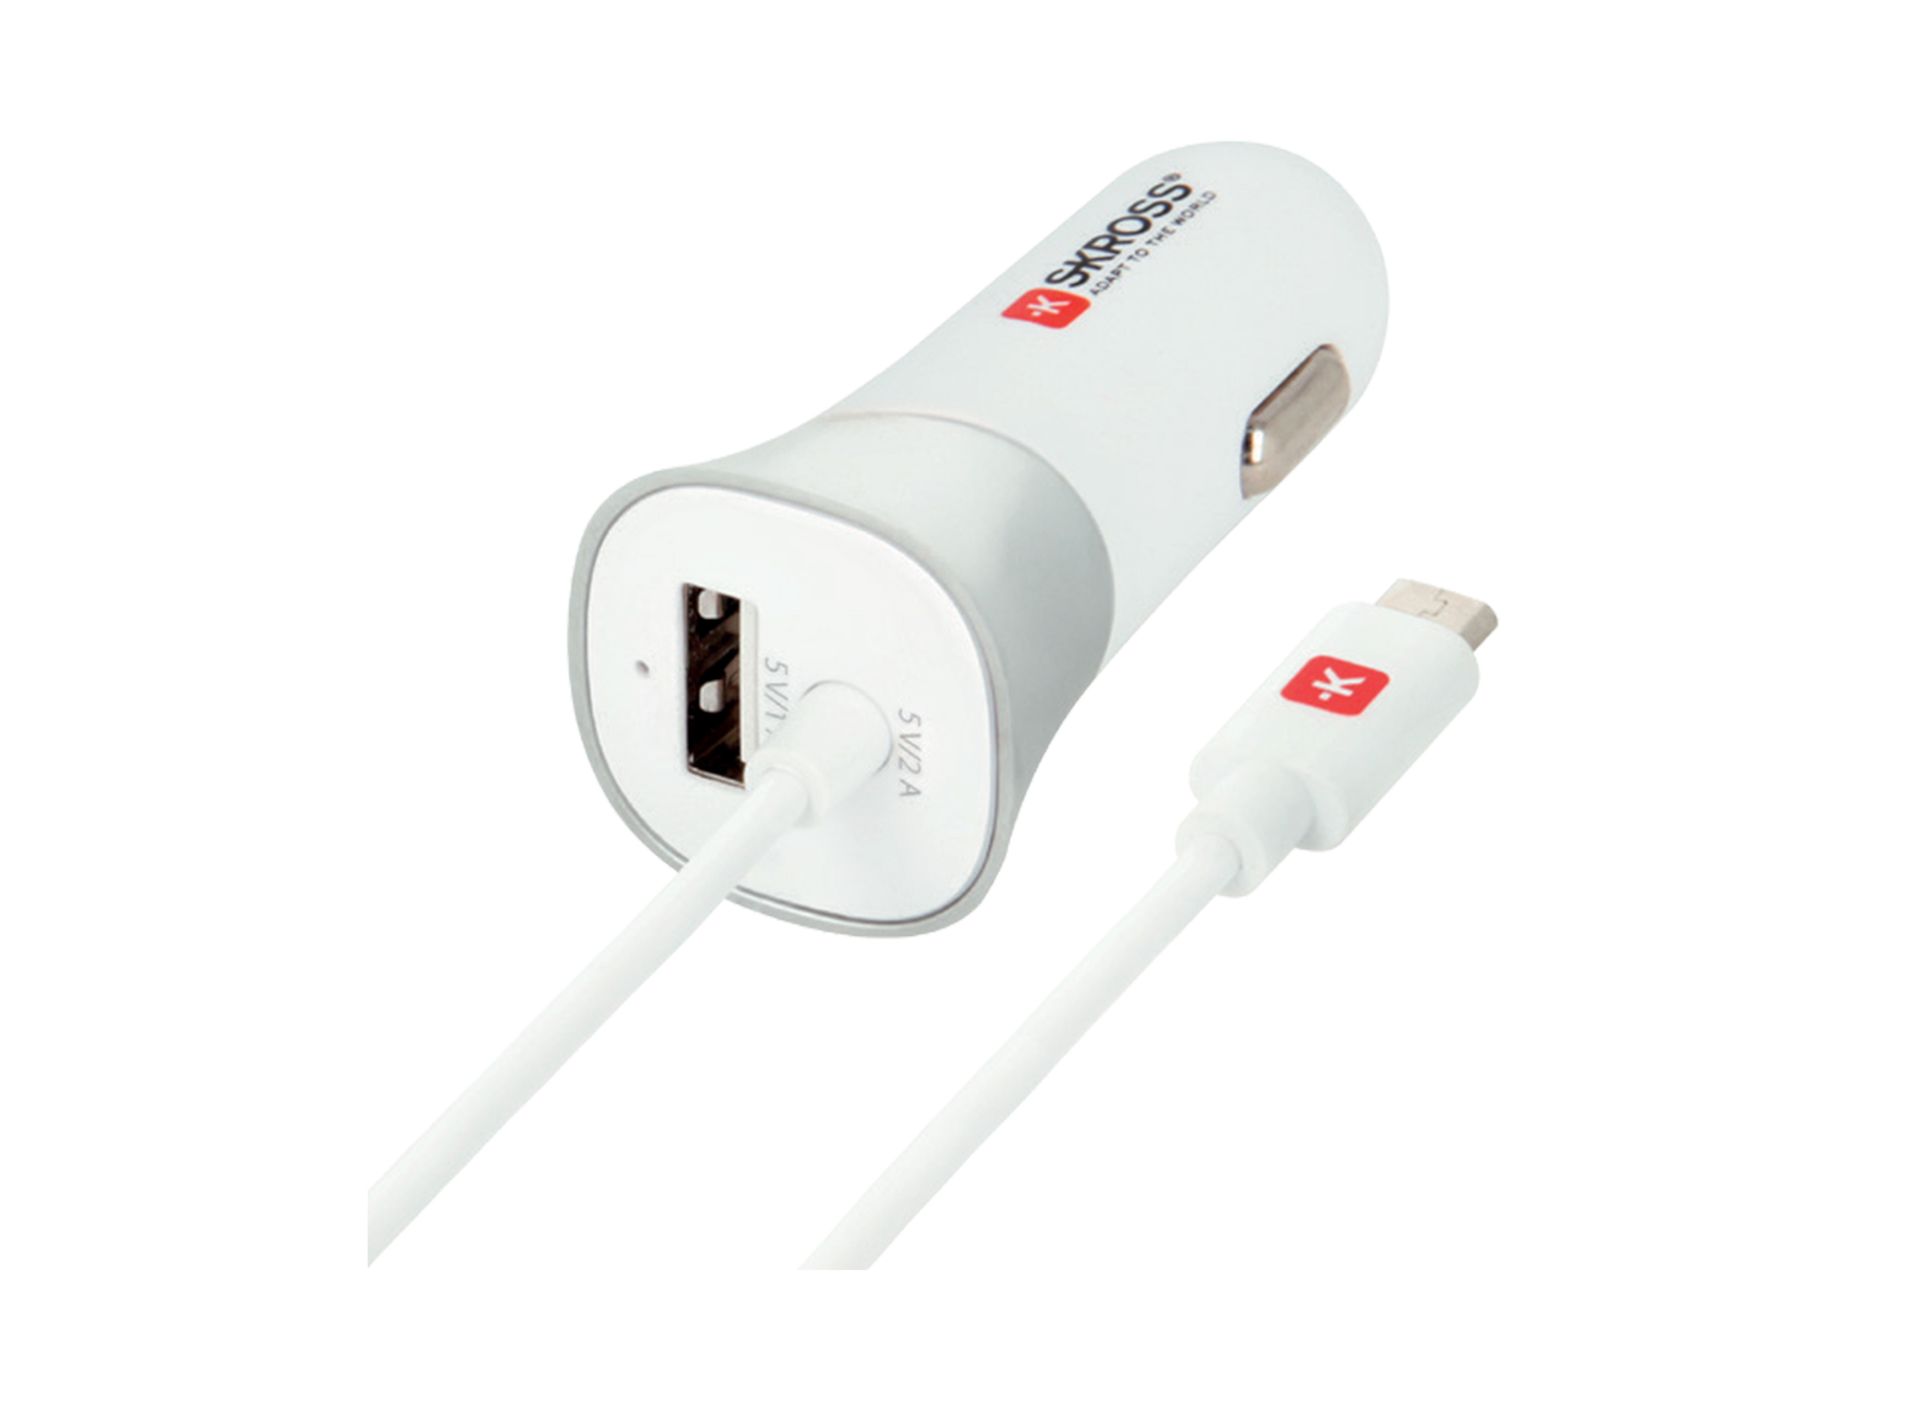 Skross USB Car Charger with micro USB cable angled